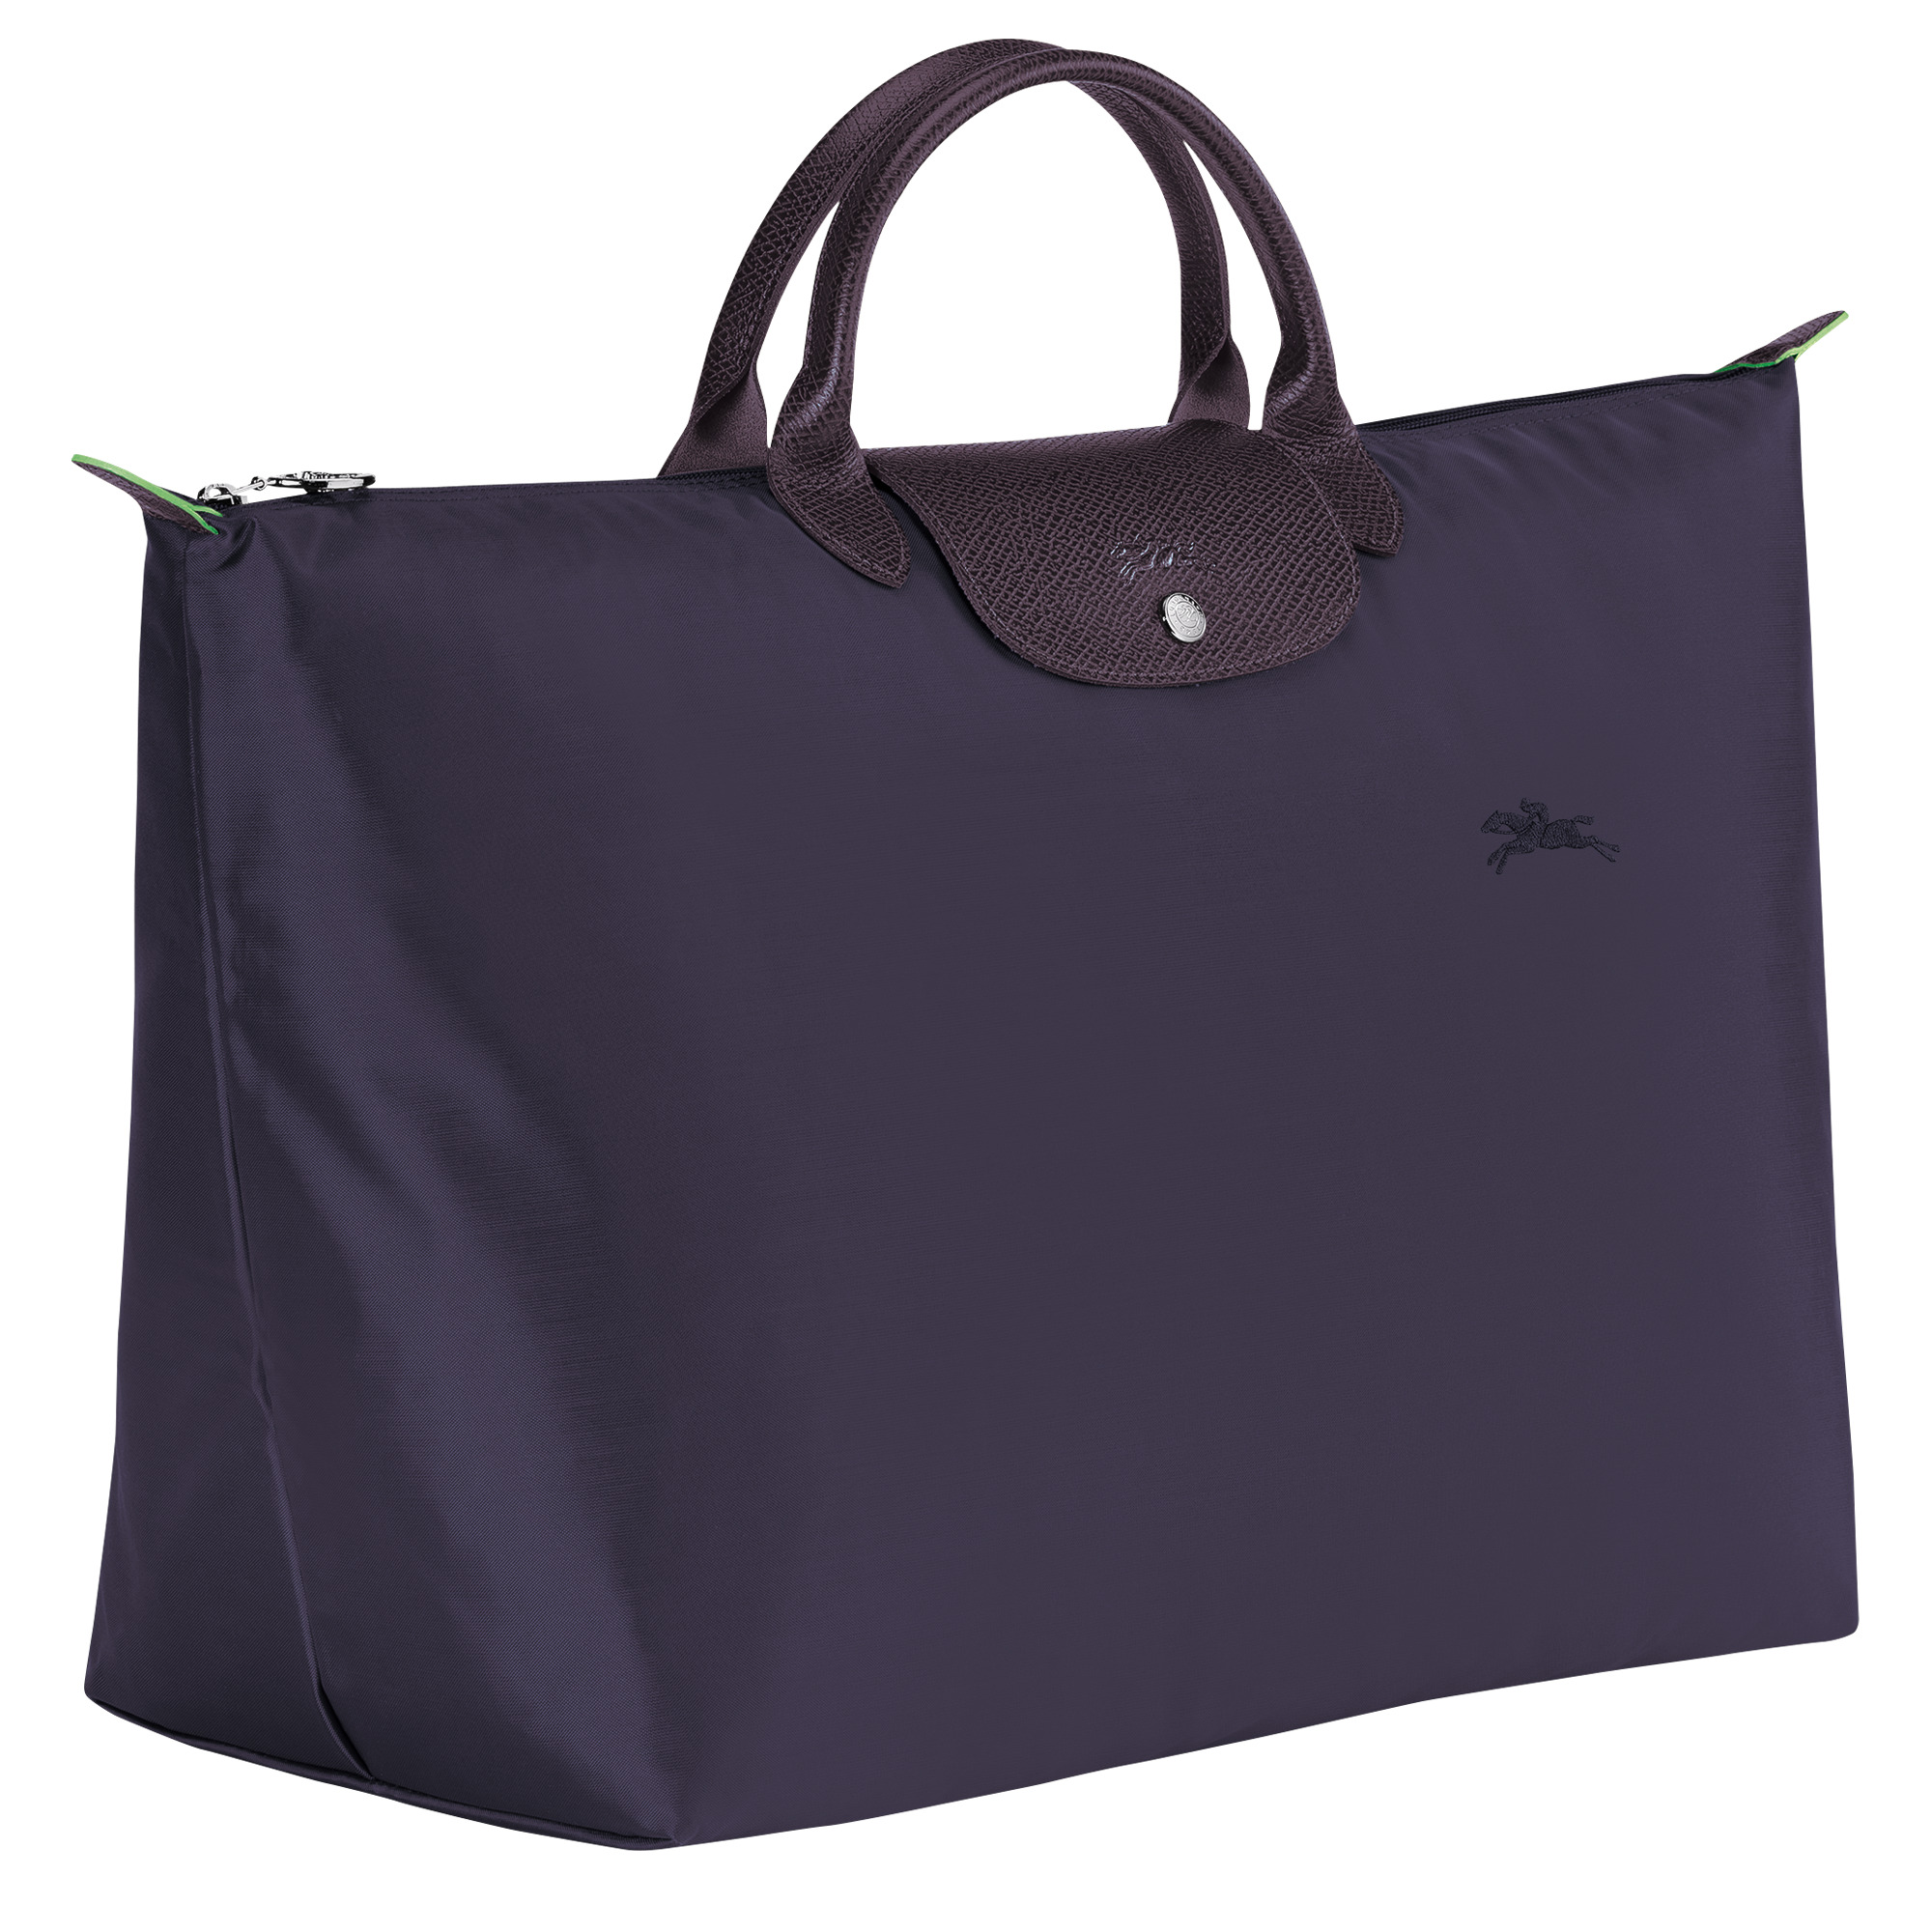 Le Pliage Green S Travel bag Bilberry - Recycled canvas - 3